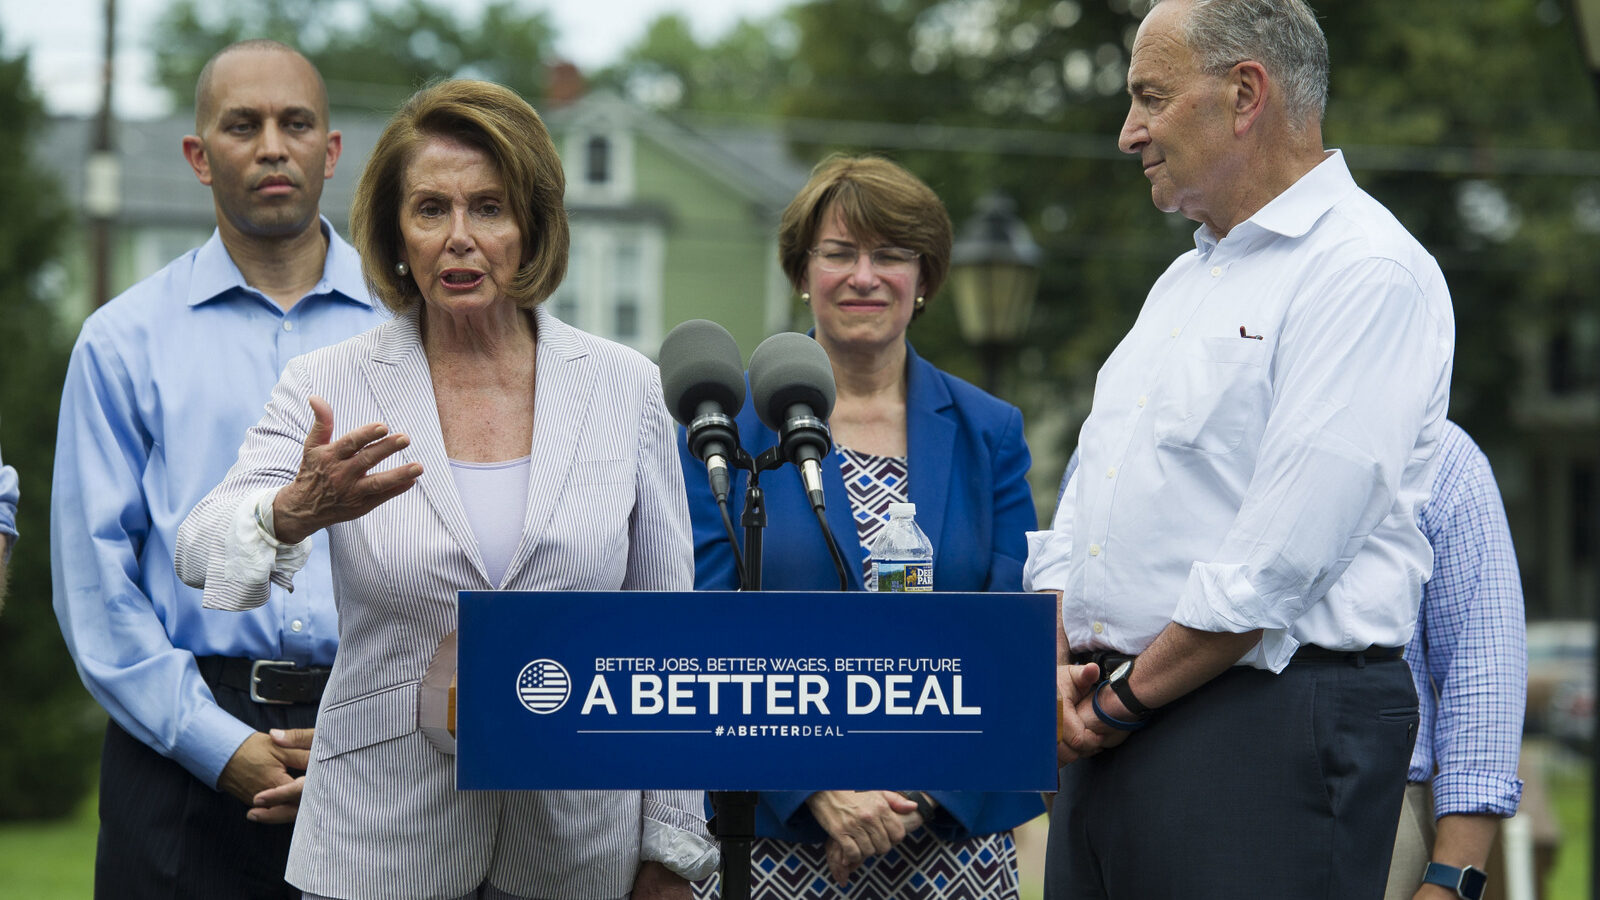 Nancy Pelosi, accompanied by, Hakeem Jeffries, D-N.Y., Sen. Amy Klobuchar, D-Minn. and Chuck Schumer of N.Y. speaks in a park in Berryville, Va., July 24, 2017, where they unveiled the Democrats new agenda. (AP/Cliff Owen)